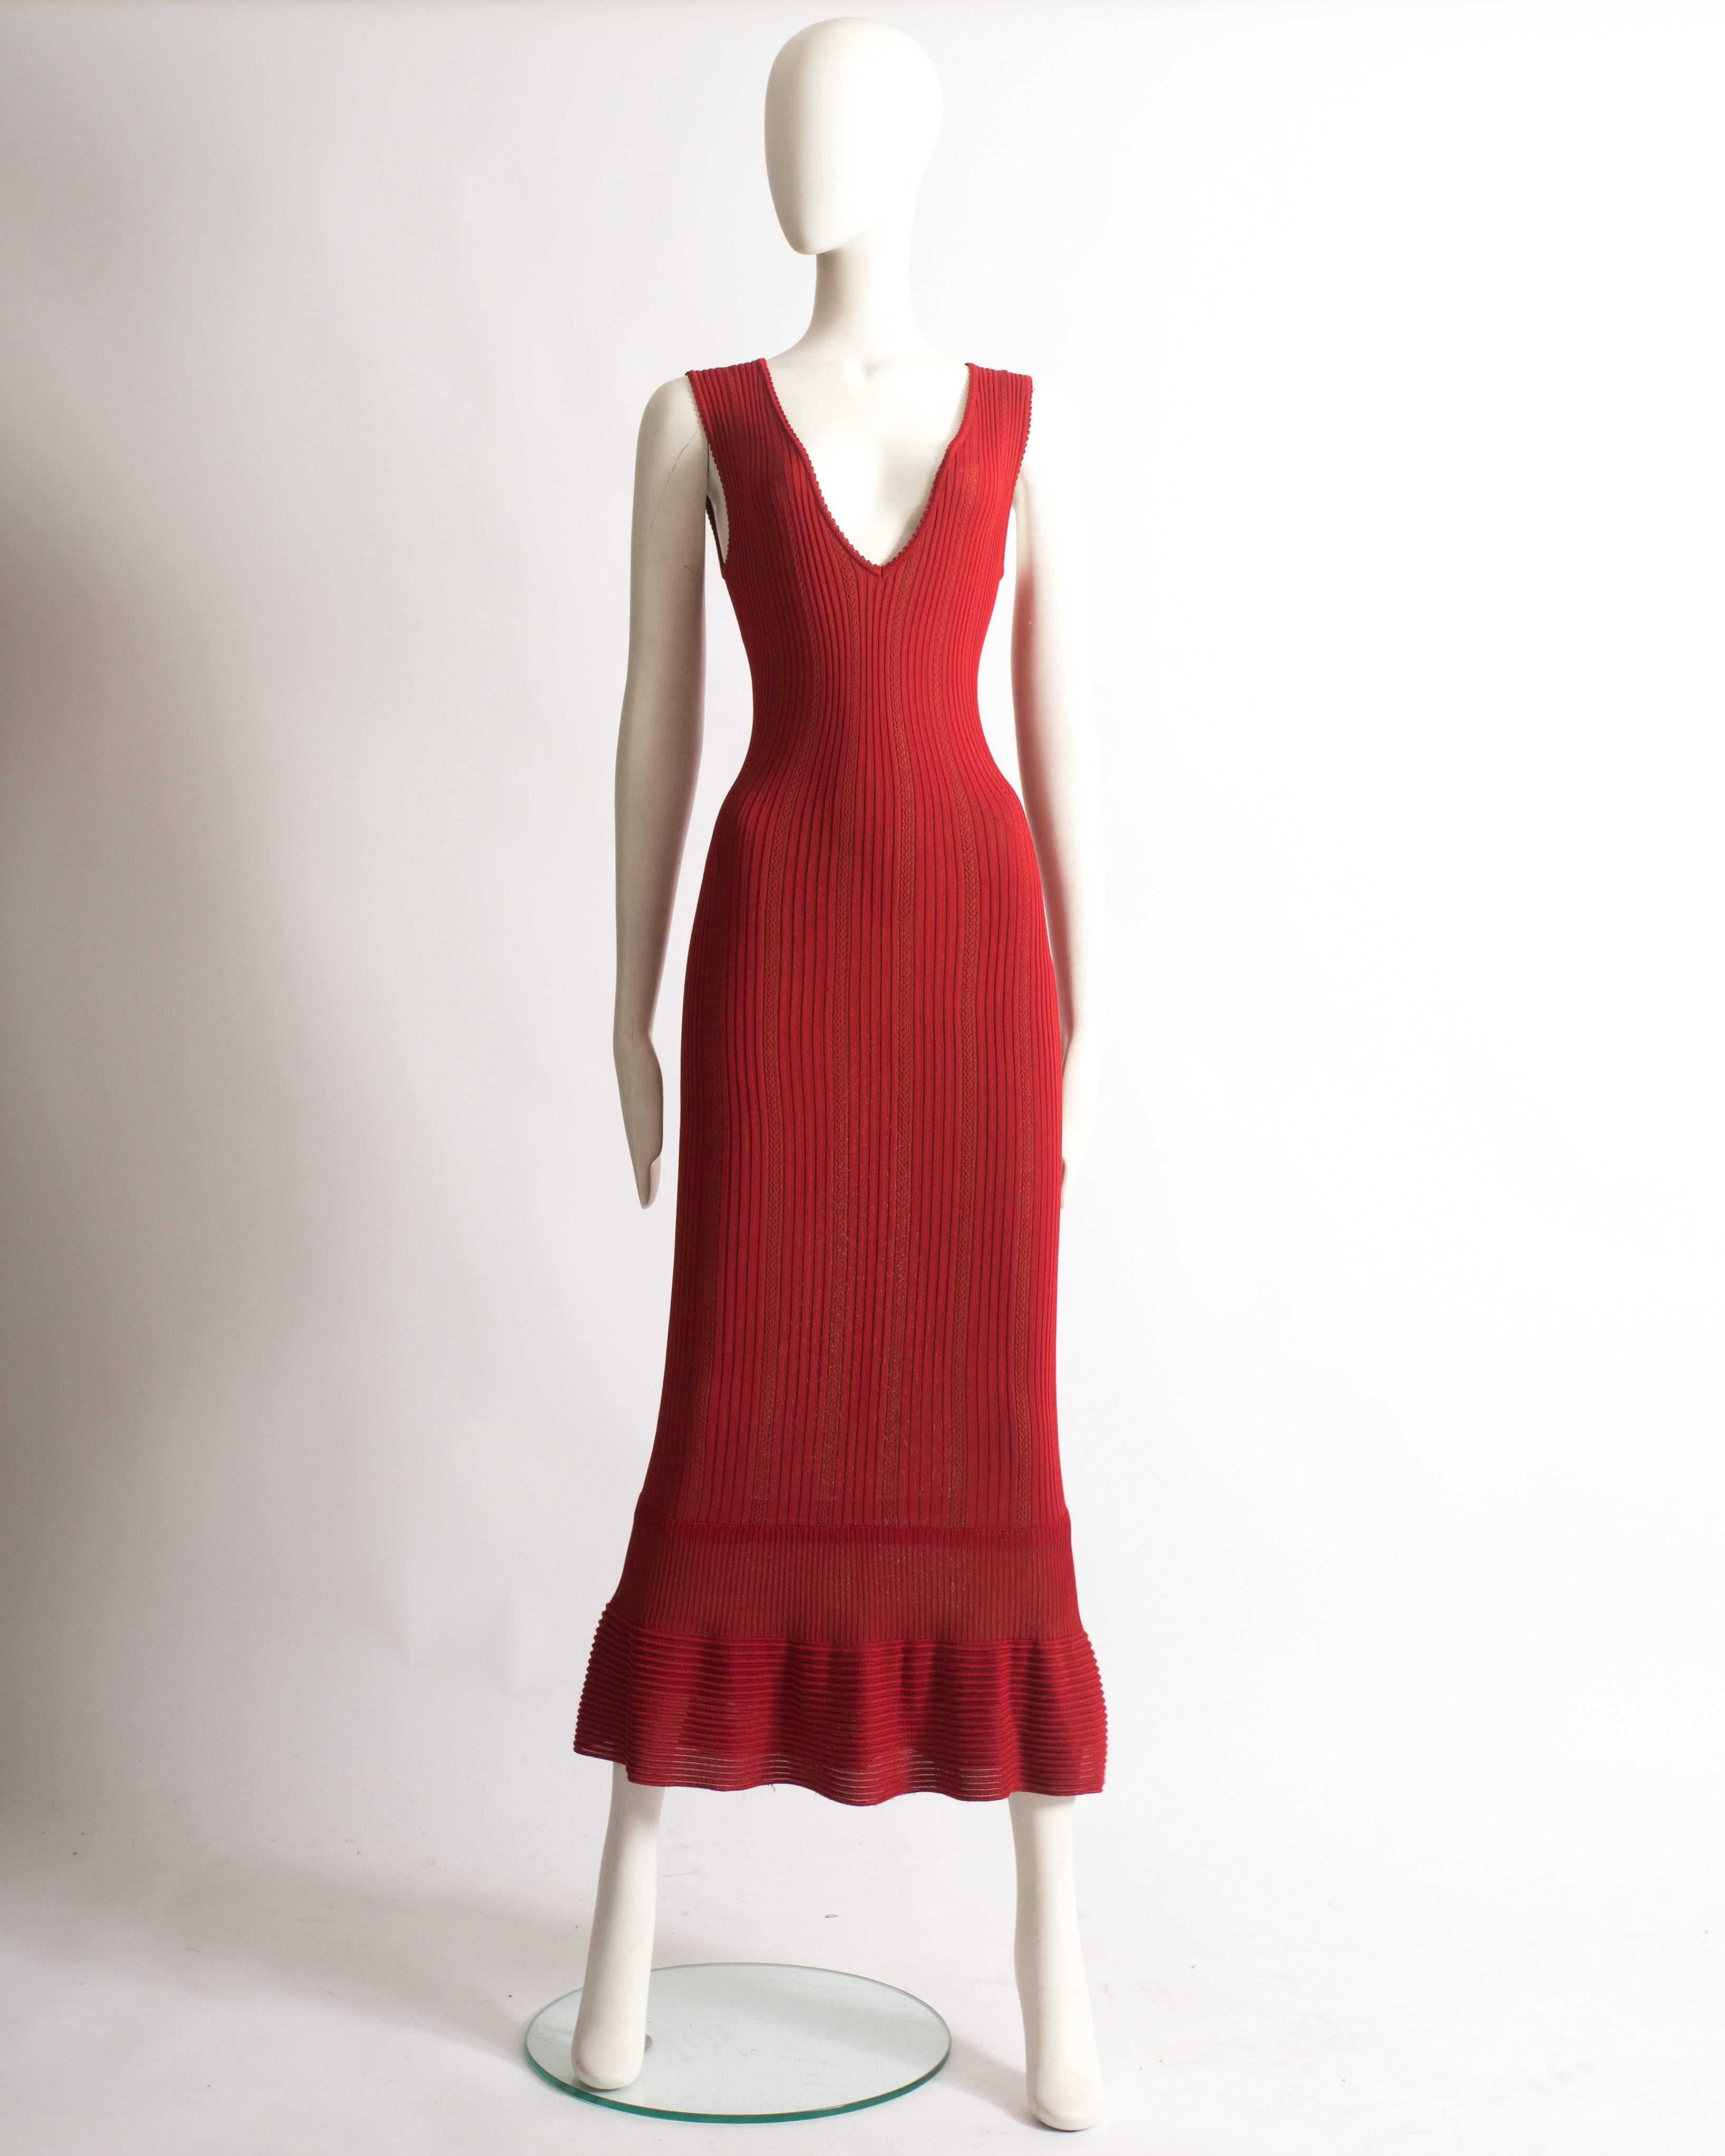 Presenting an alluring Azzedine Alaia red ribbed knit evening dress, a true masterpiece from the spring-summer 1996 collection. This dress showcases the designer's unparalleled craftsmanship and exquisite design.

The ribbed knit fabric creates a